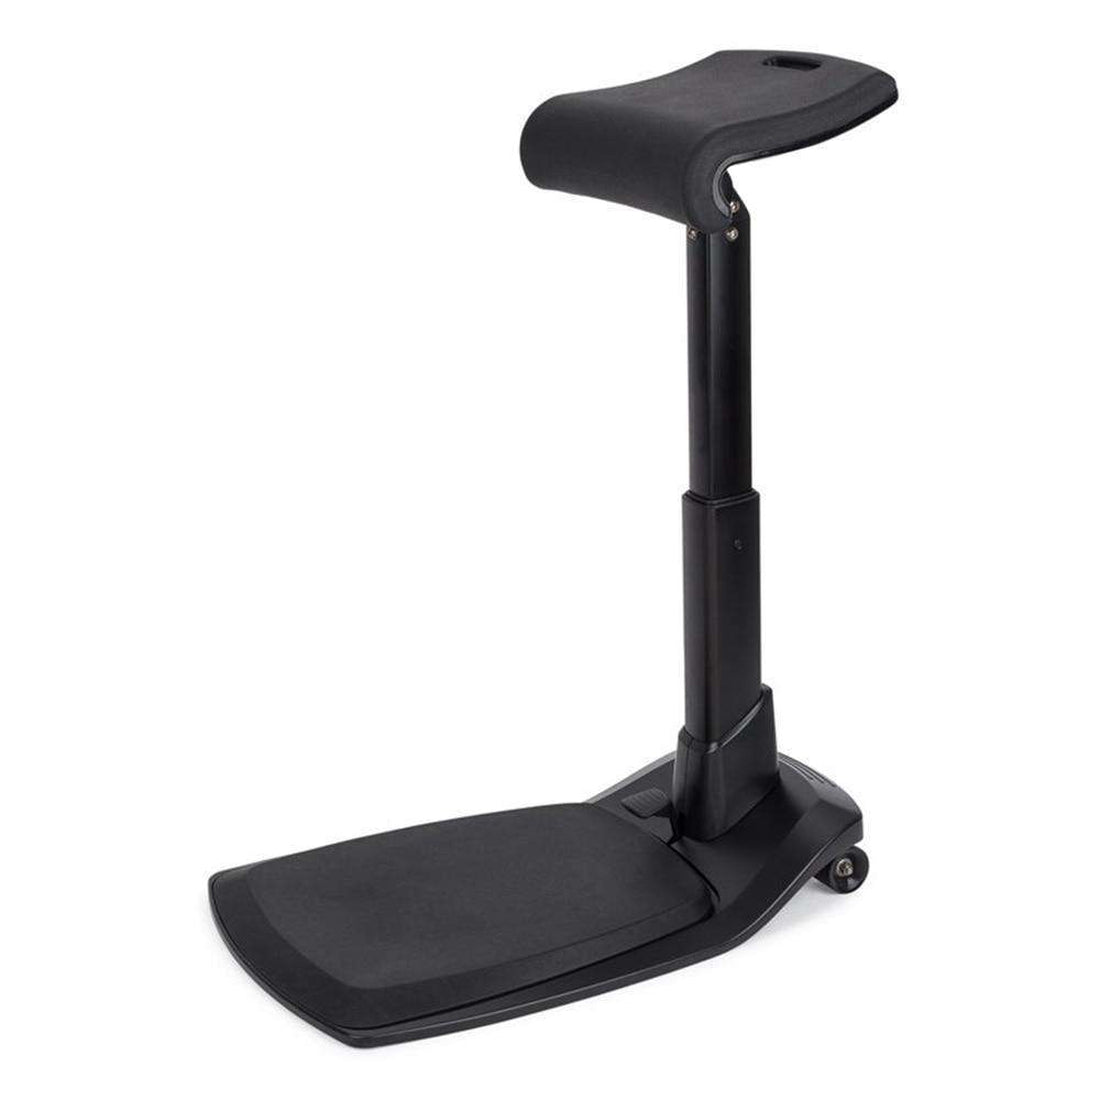 Best Standing Desk Chair For Leaning And Posture LeanRite Elite ...